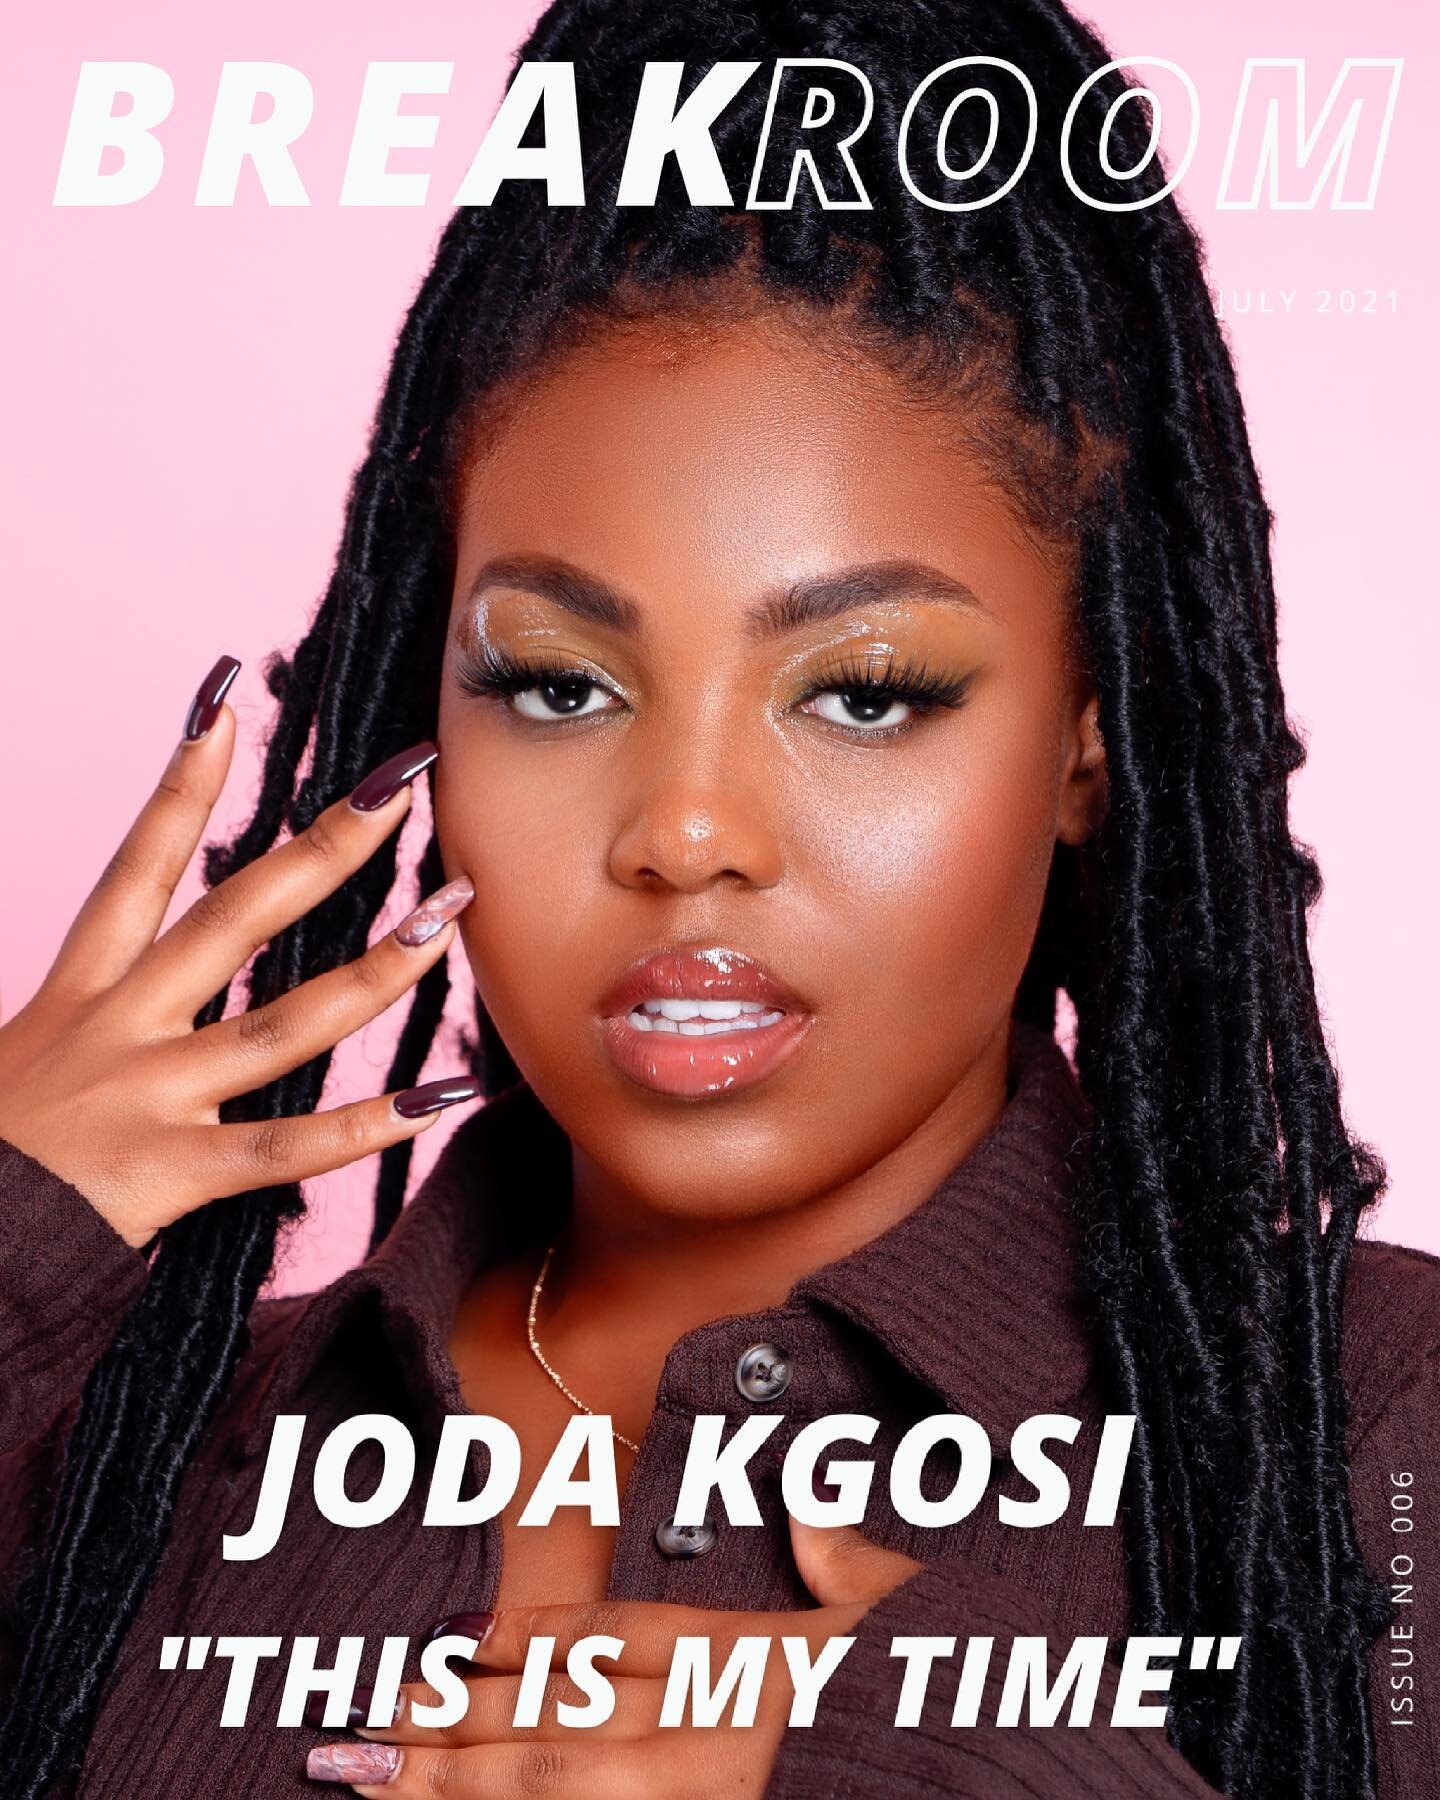 Welcome to Joda Kgosi&rsquo;s World.

At just 18 years old, @jodakgosi drops her long awaited debut project &ldquo;Sour Milk&rdquo; today. 

For our July cover story, @lelowhatsgood chats to the South African songstress about the heartbreak that insp